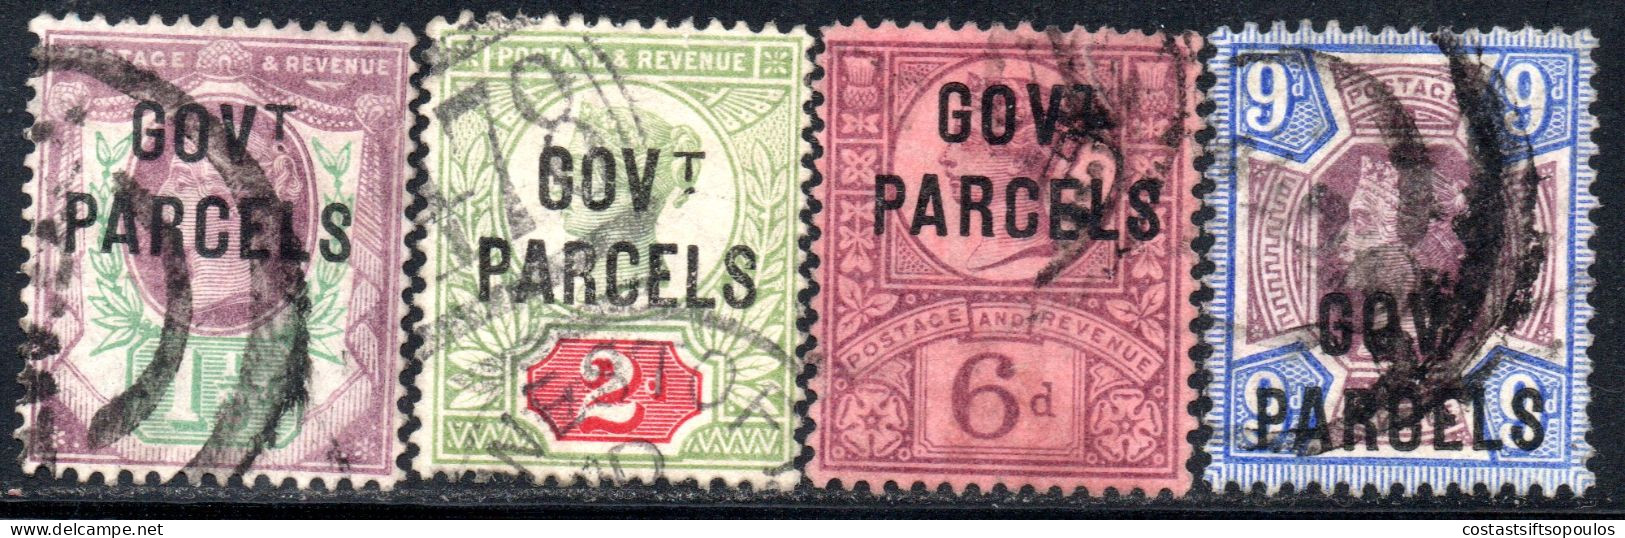 3075. 1887-1900 4 GOVERNMENT PARCELS STAMPS LOT. - Oficiales